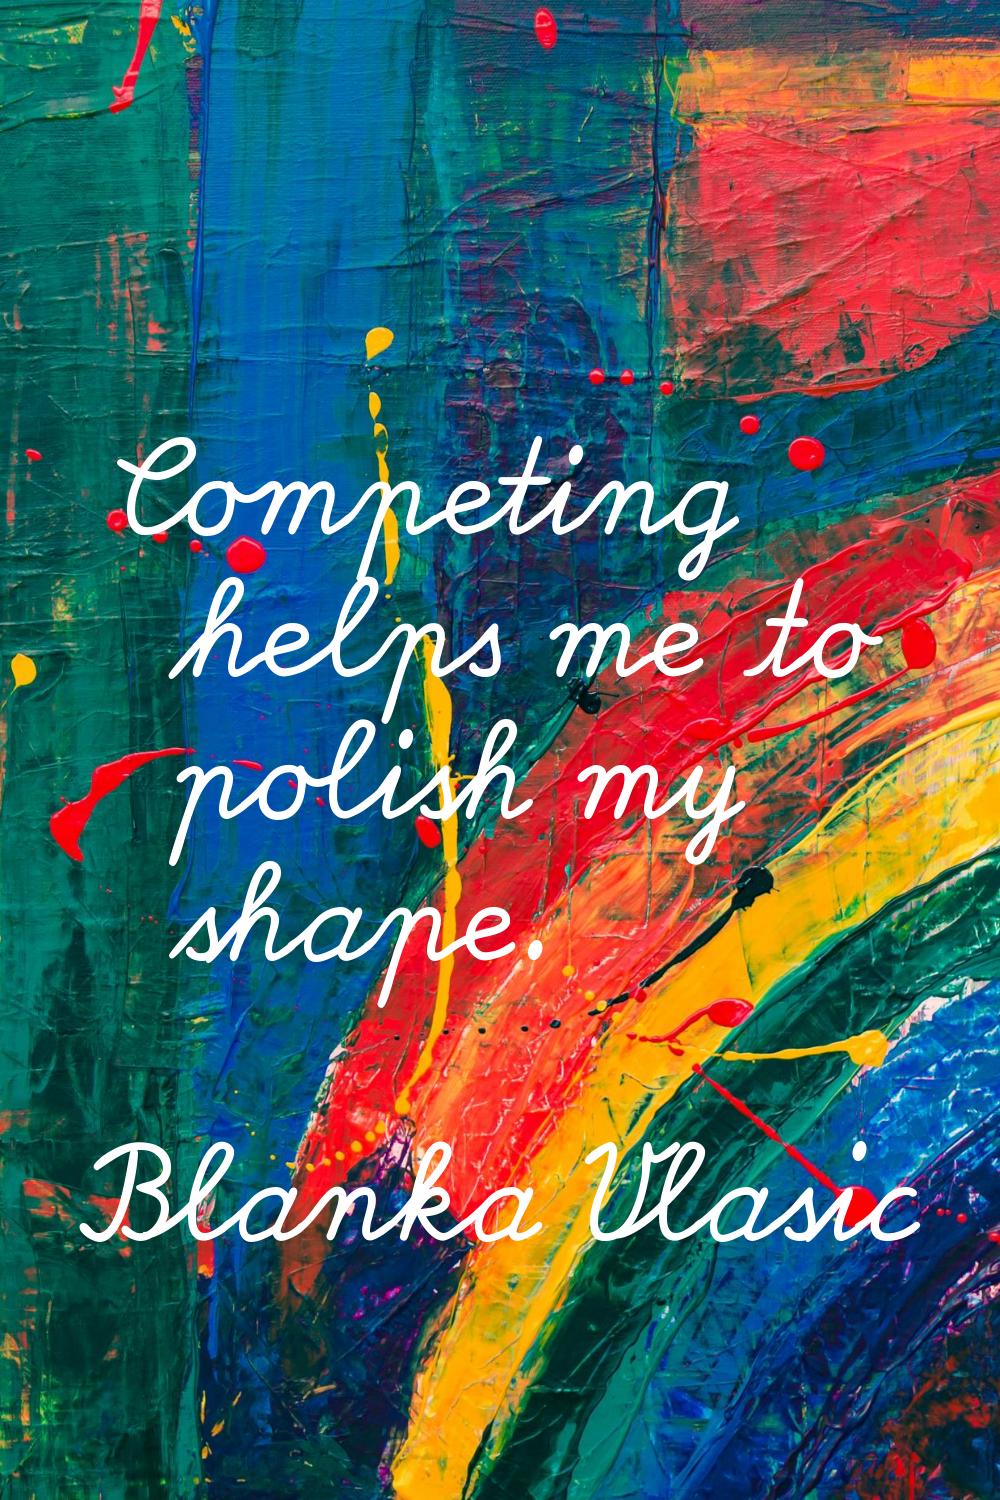 Competing helps me to polish my shape.